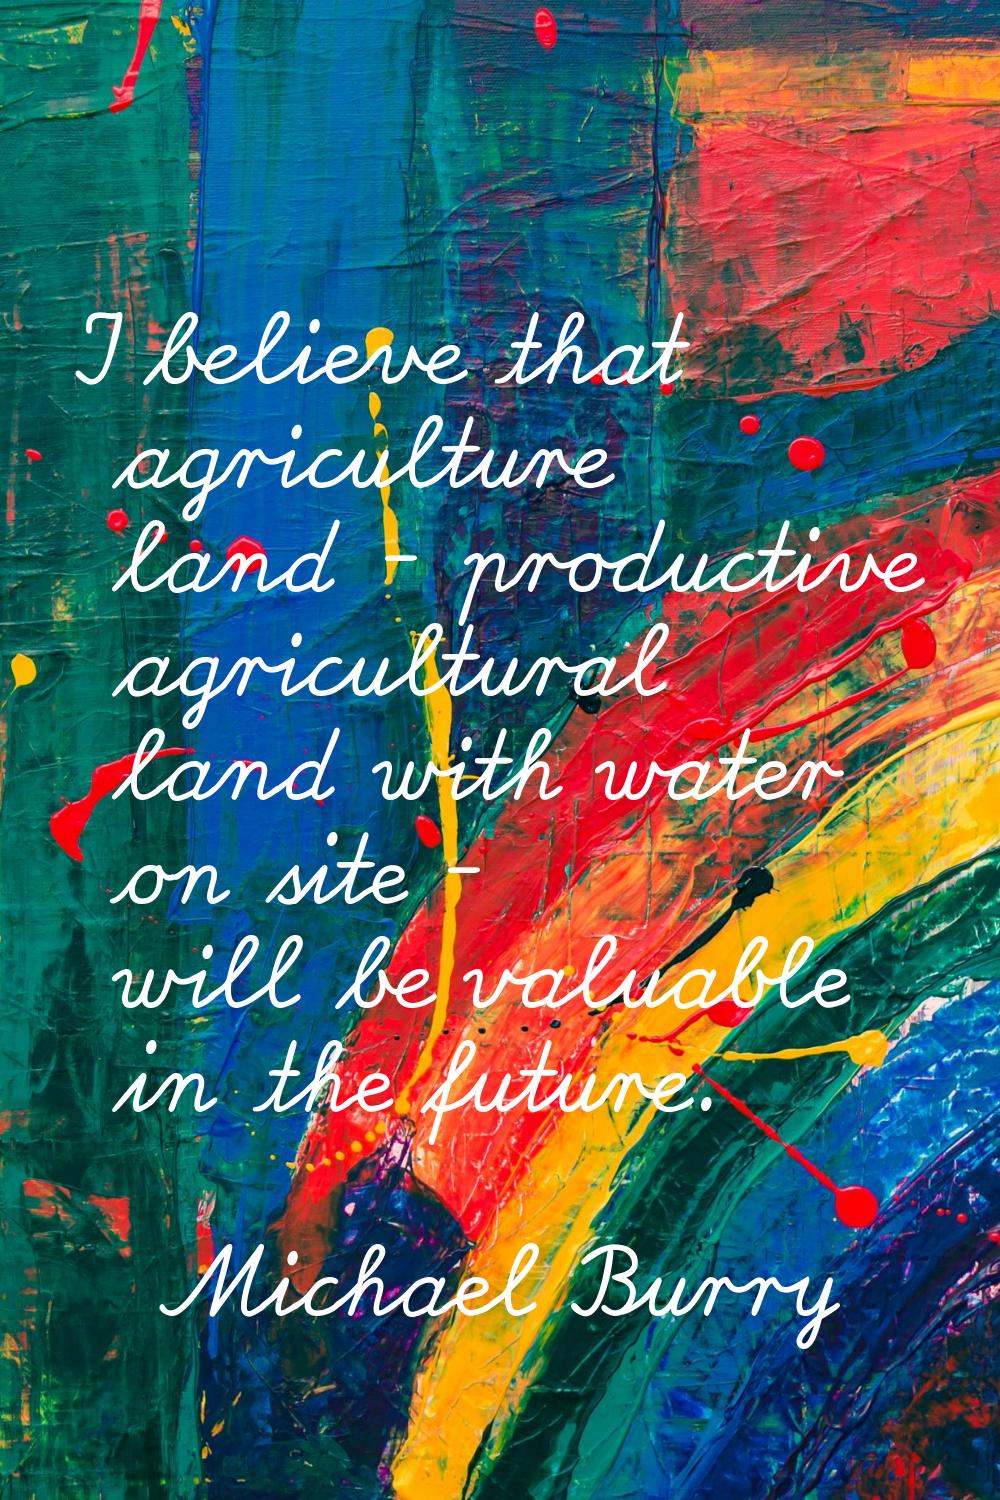 I believe that agriculture land - productive agricultural land with water on site - will be valuabl